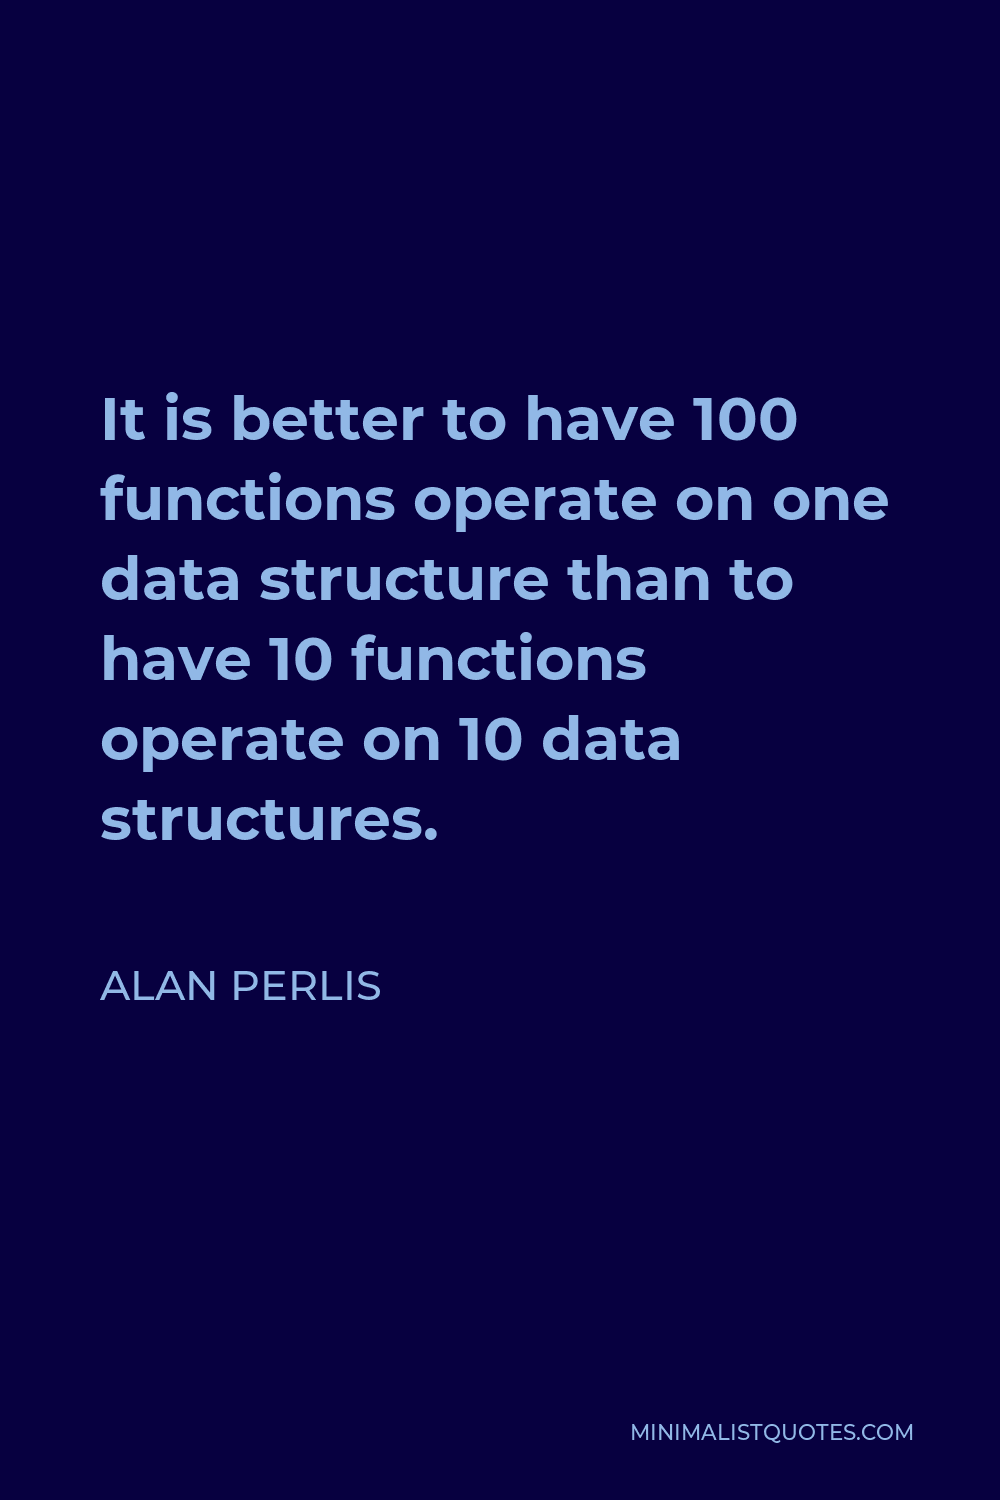 Alan Perlis Quote - It is better to have 100 functions operate on one data structure than to have 10 functions operate on 10 data structures.